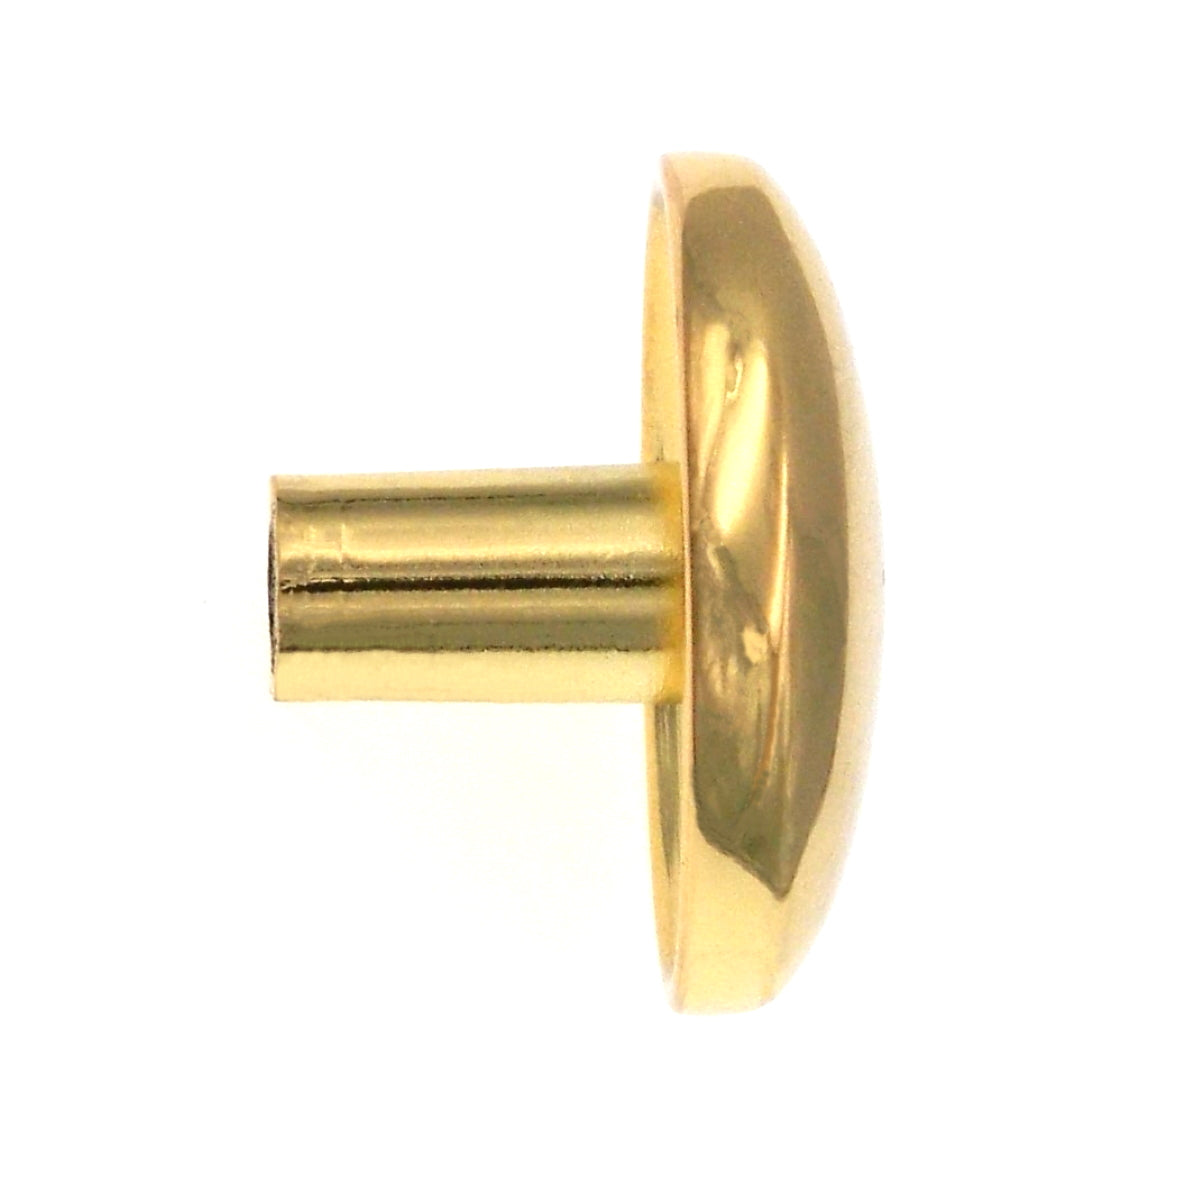 Warwick Contemporary Polished Brass 1 1/4" Dome Round Cabinet Knob Pull DH1014PB